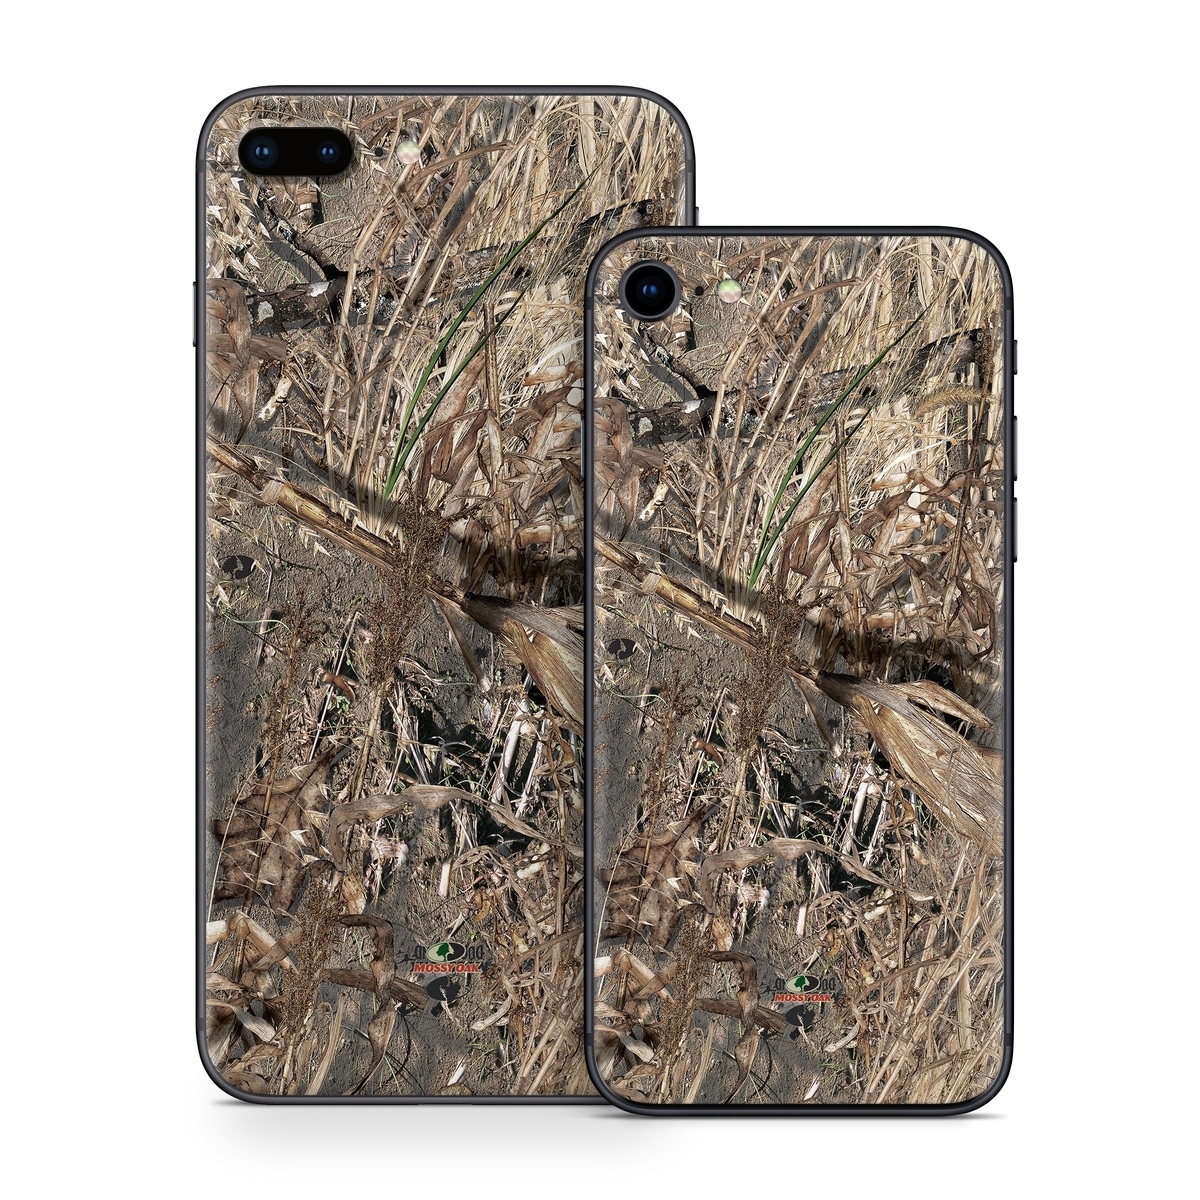 iPhone 8 Series Skin design of Soil, Plant, with black, gray, green, red colors